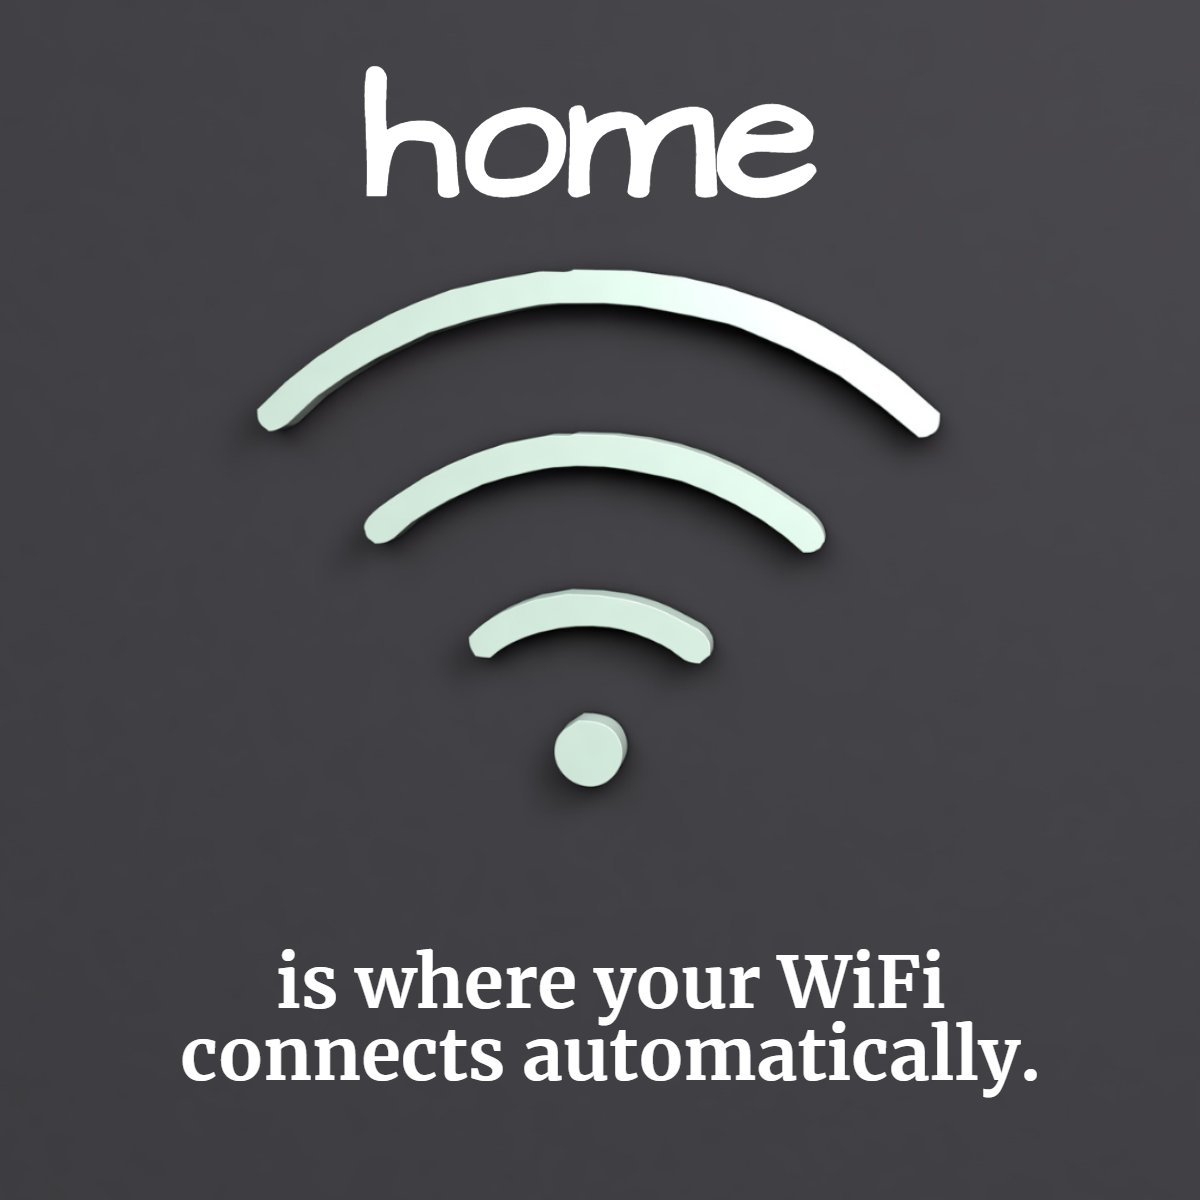 Home is where your WiFi... Connects automatically. 📱📶

#home #wifi #stayhome #homestyle #hometime #homesofinstagram #wearehome
 #swflhousetohometeam